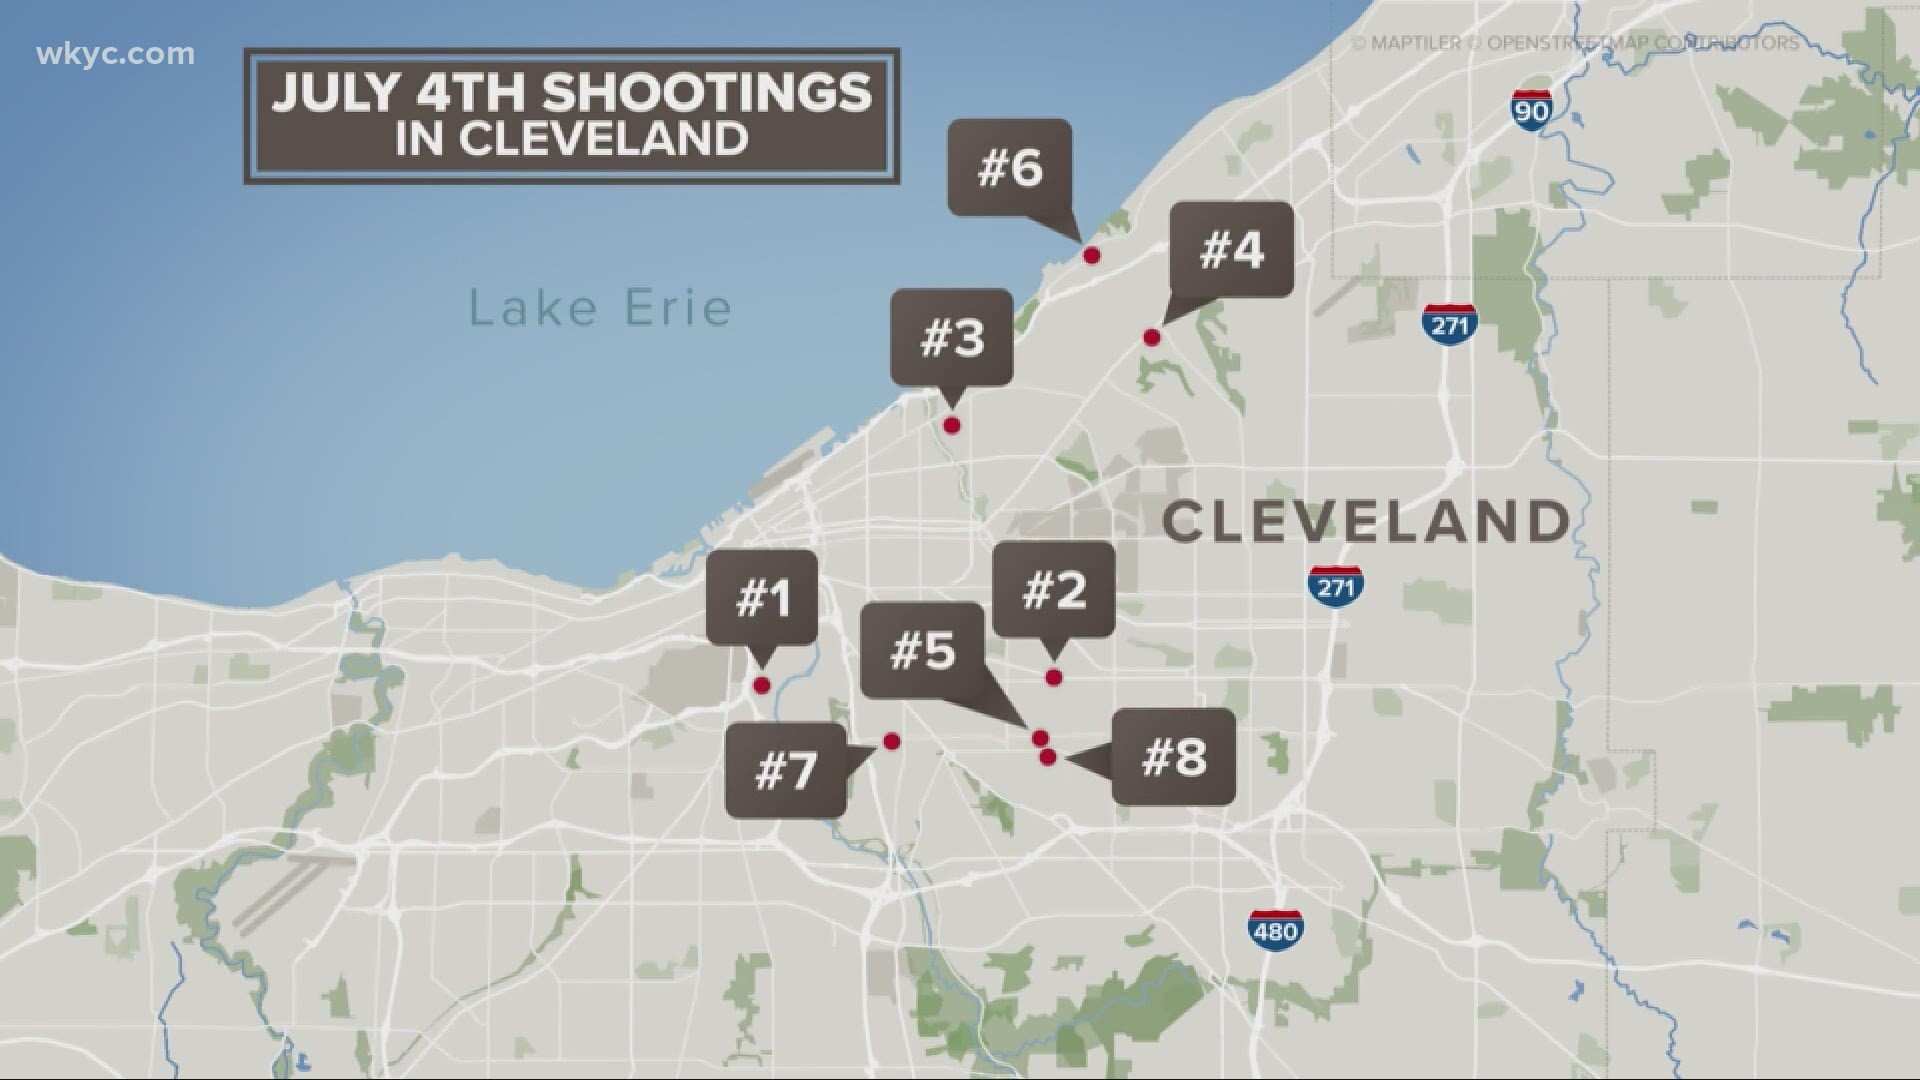 Cleveland reported nine shootings between 6 a.m. on July 4 and 6 a.m. on July 5. Rachel Polansky takes a look at the alarming crime rates in the city.